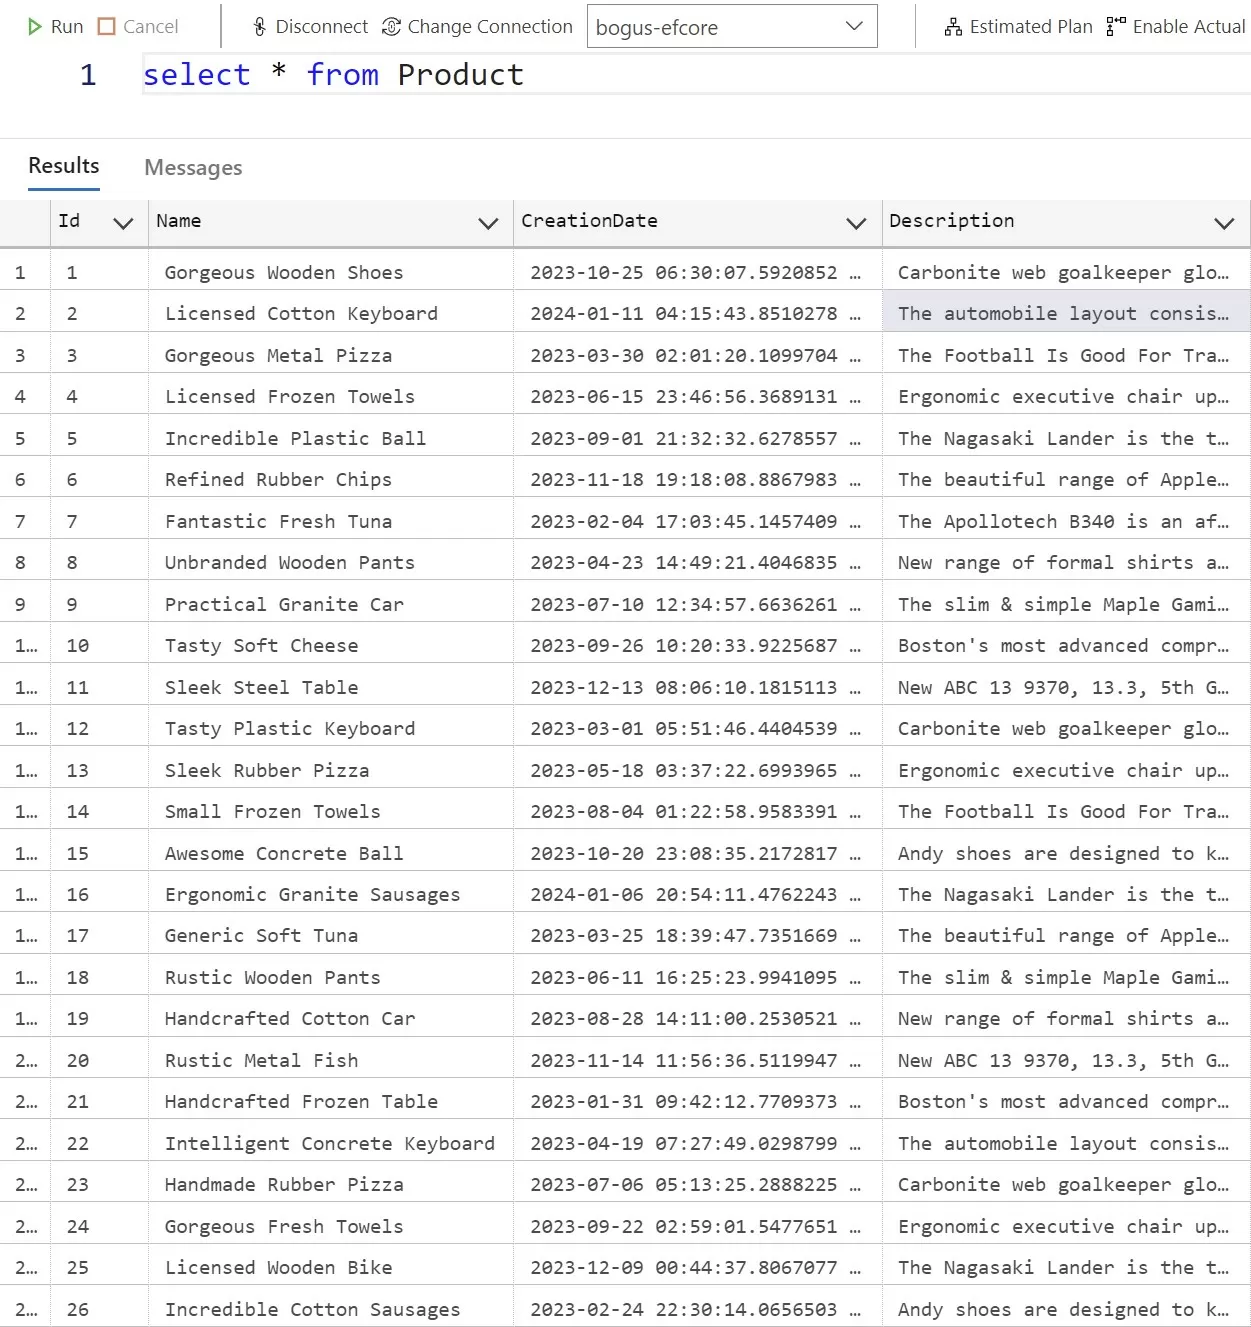 Results of a SQL query showing the generated products